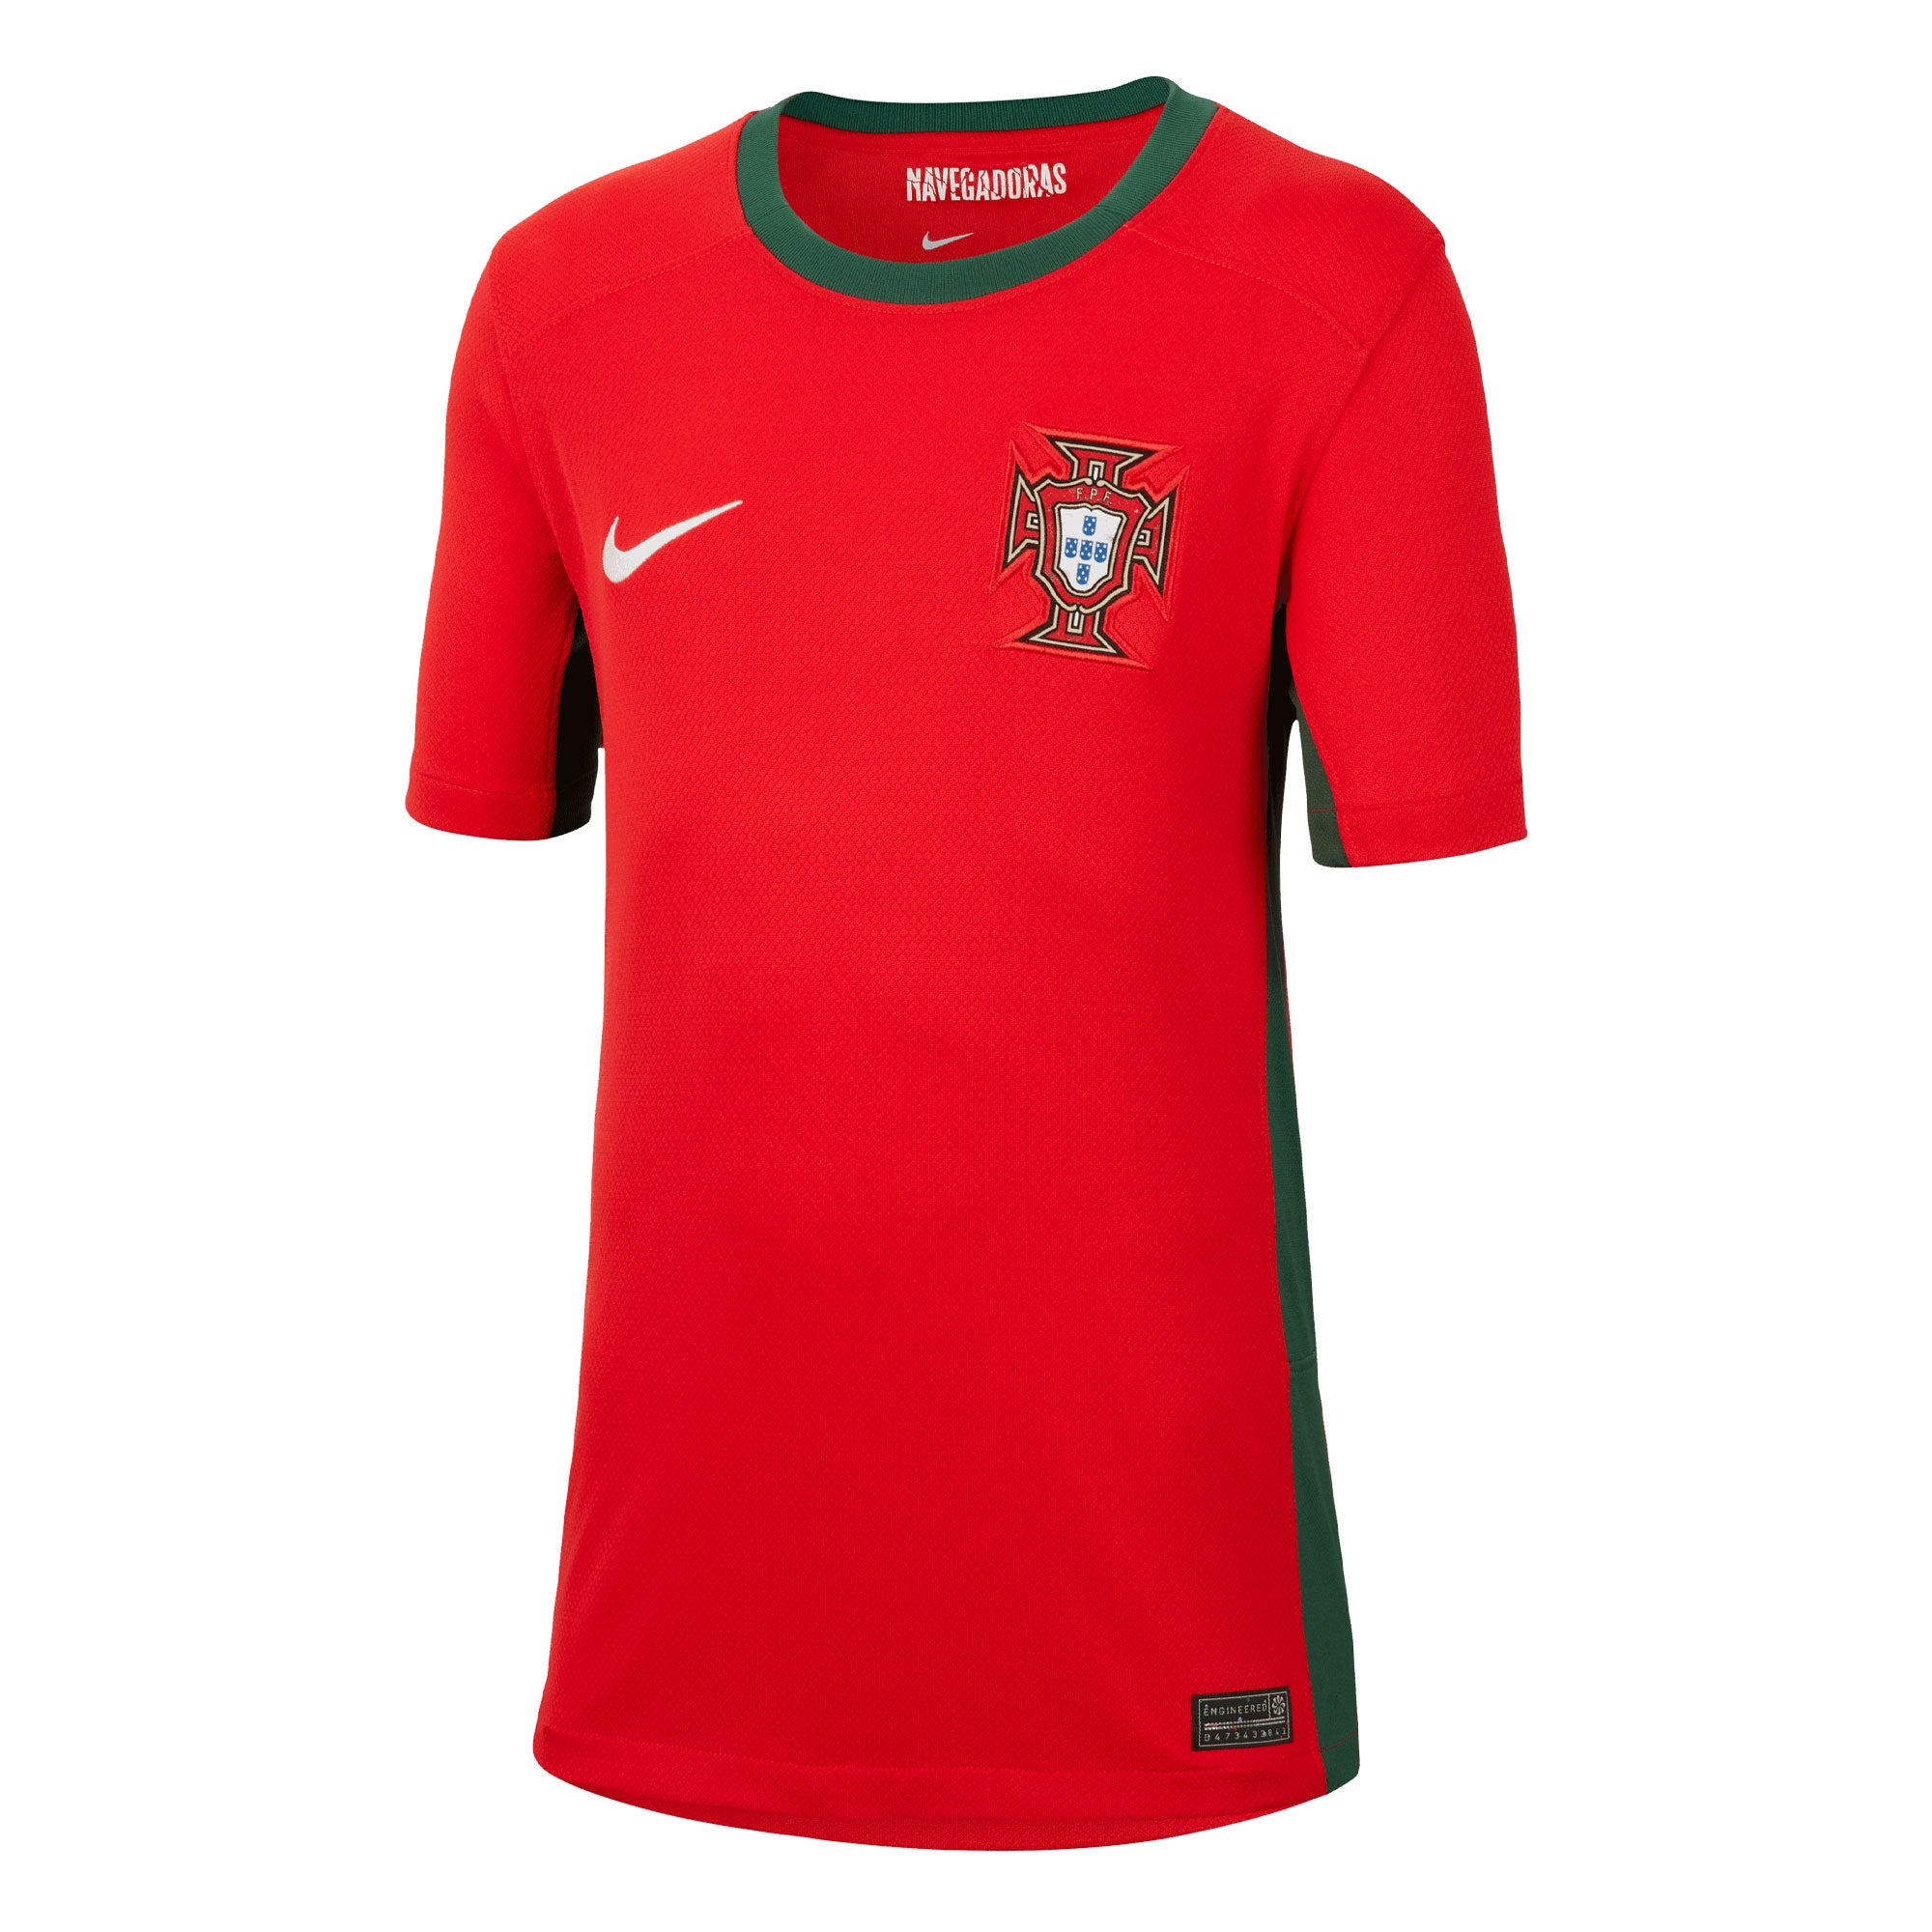 youth portugal soccer jersey